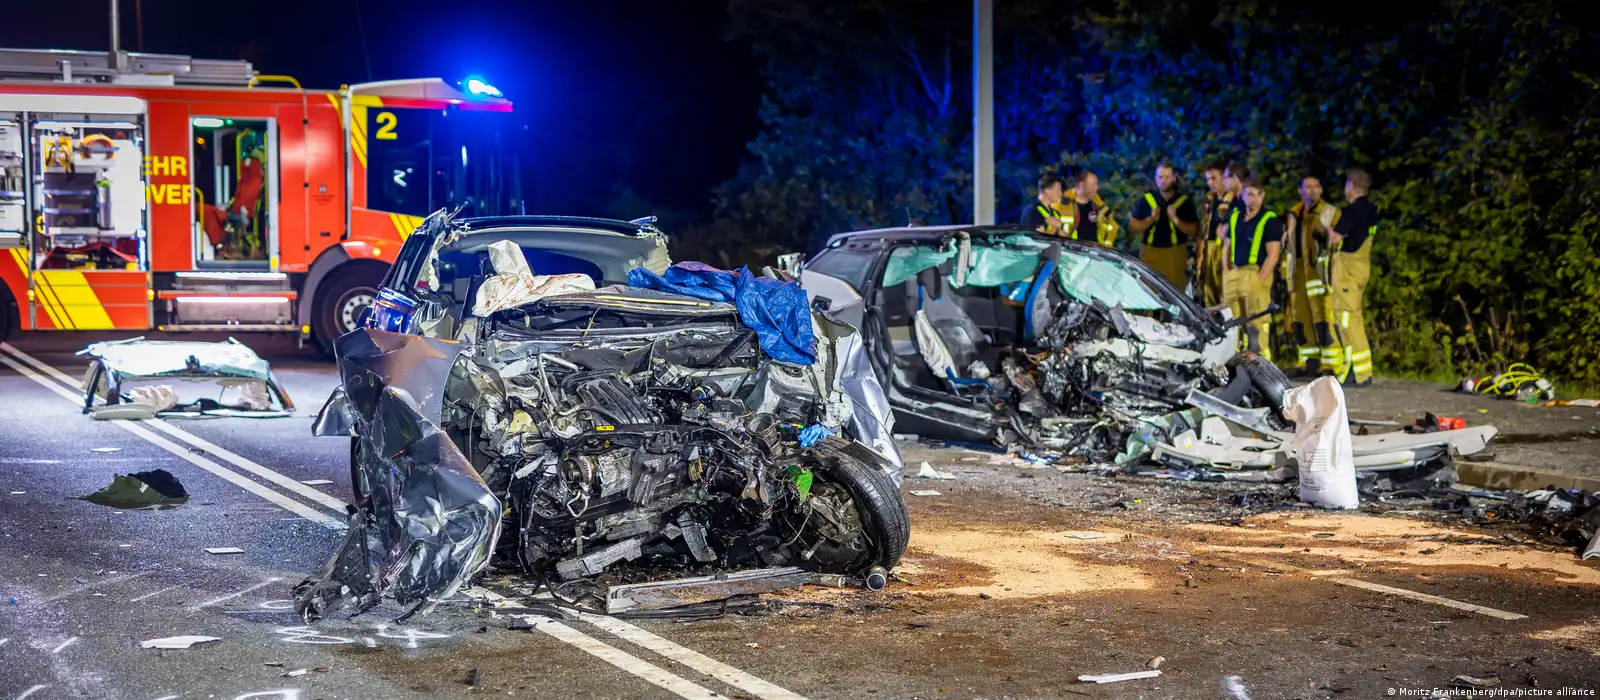 Four died in a head-on collision